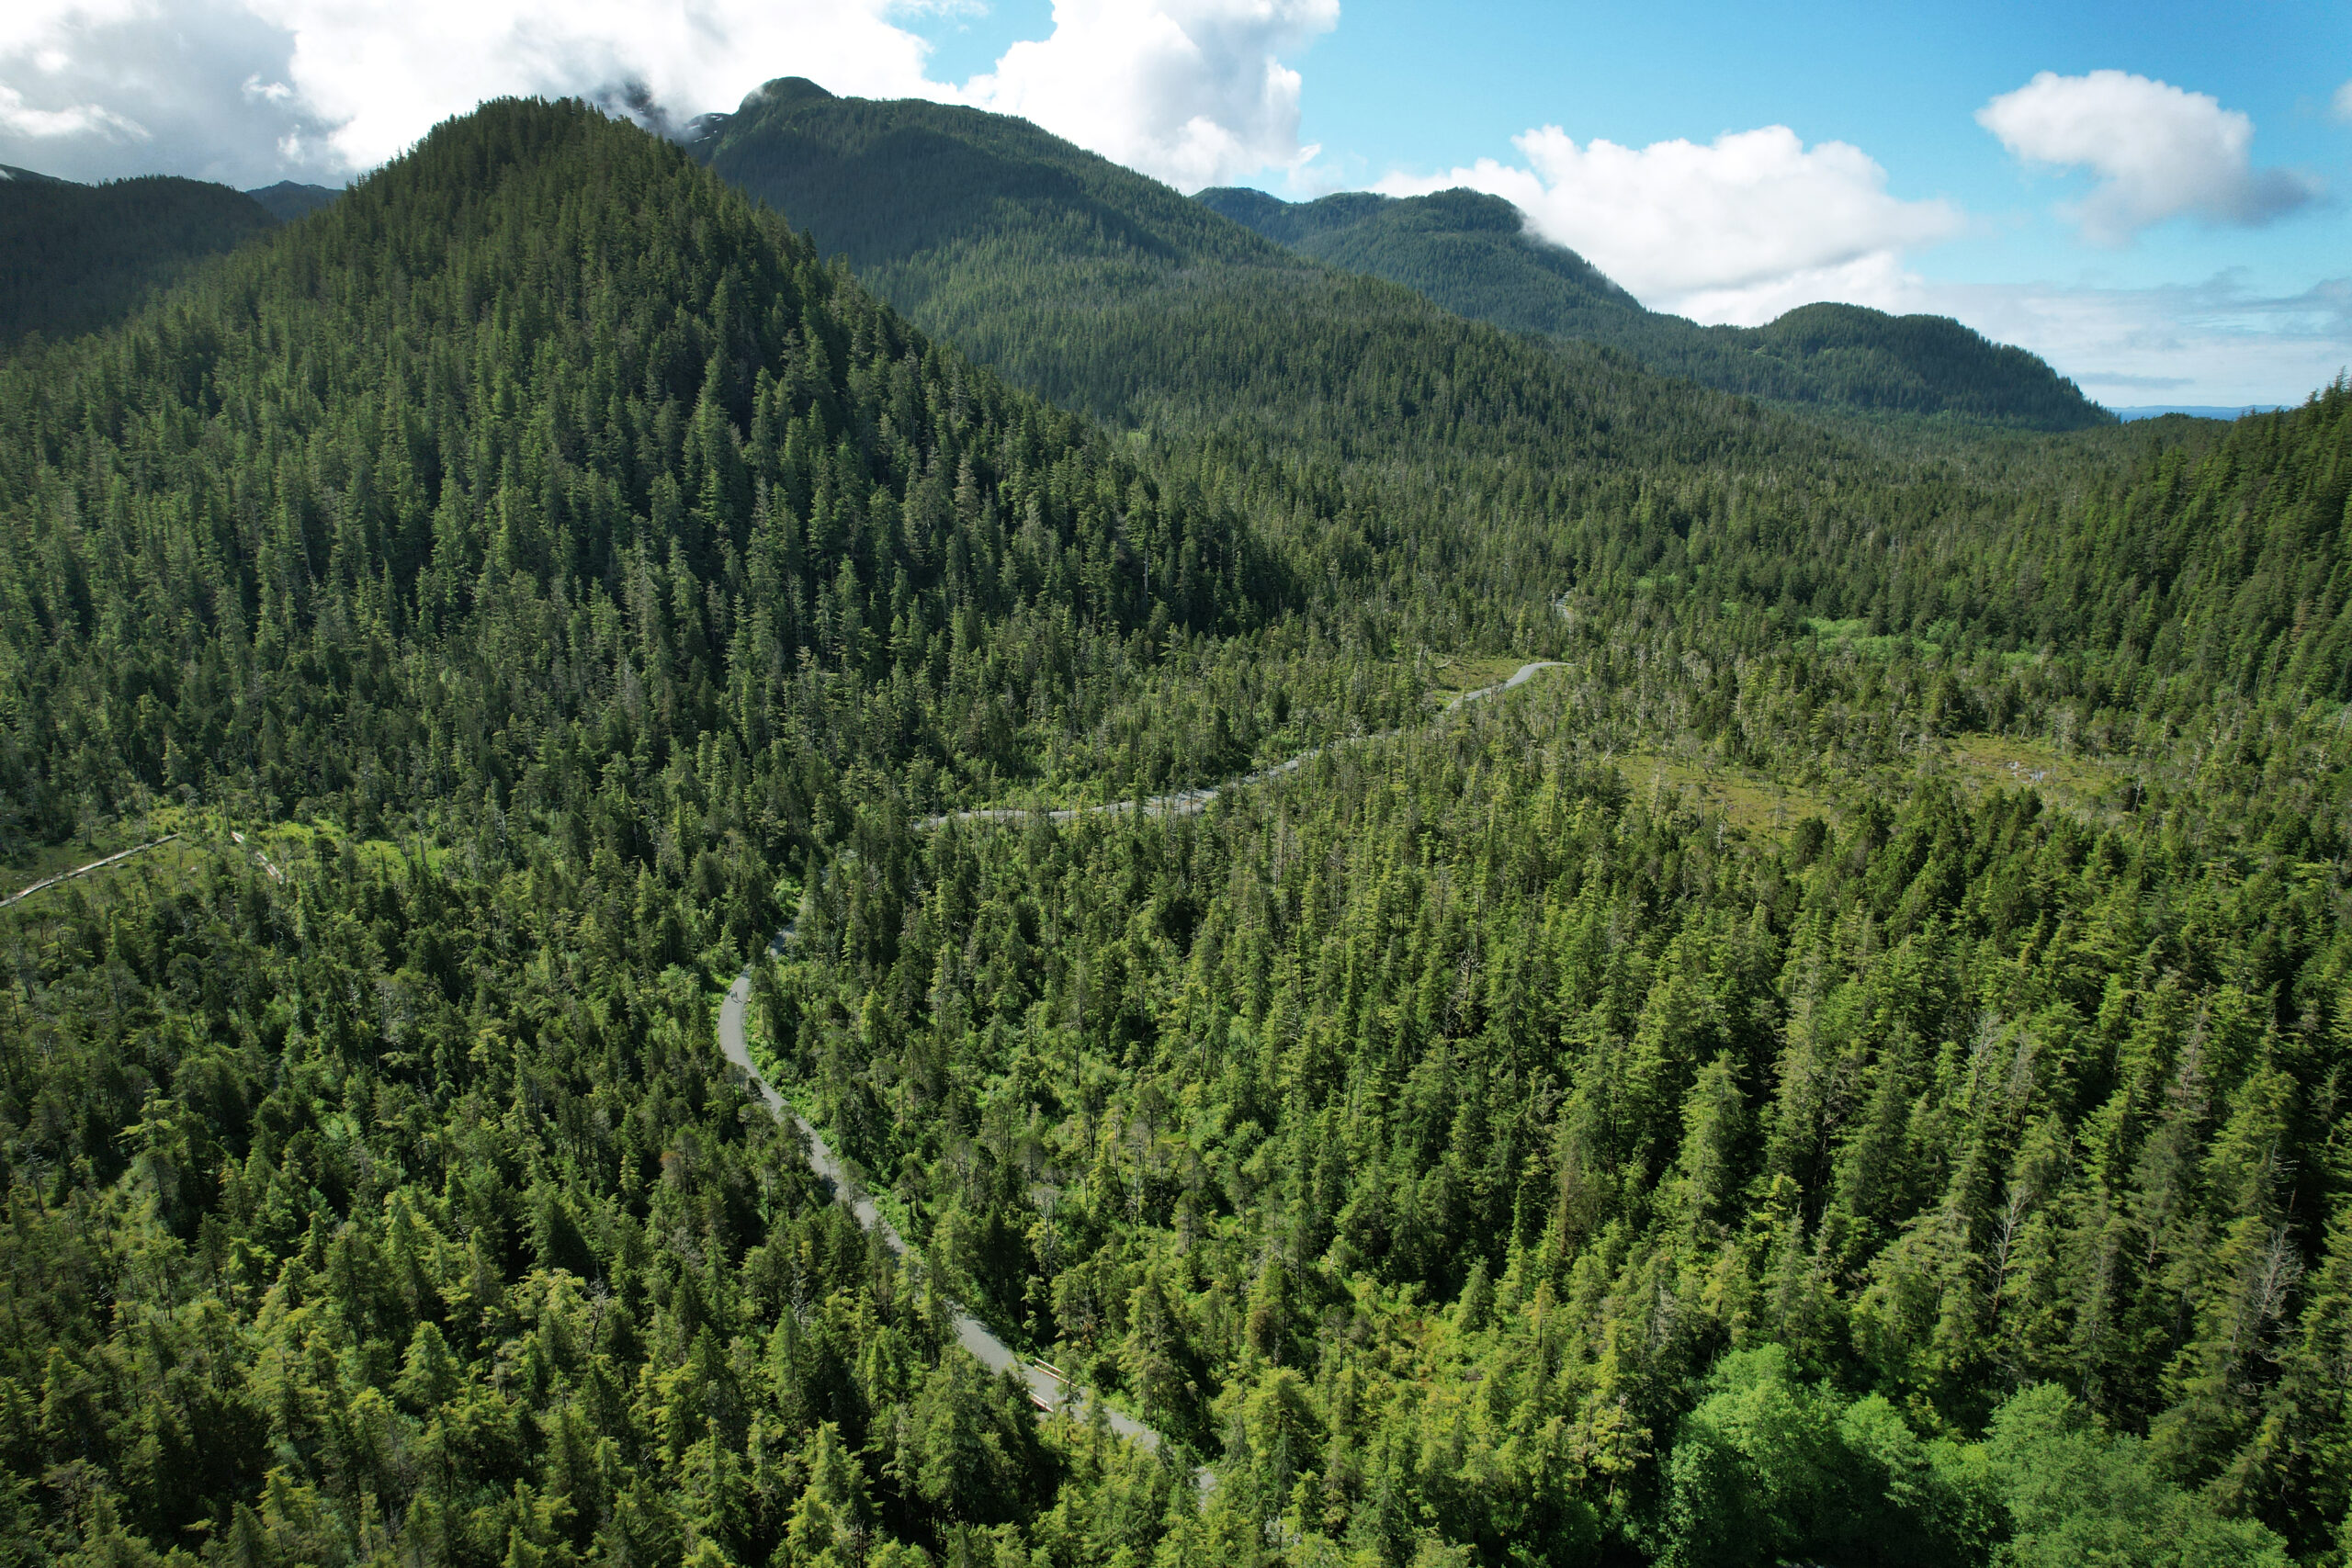 A view of the Sitka Cross Trail via drone.